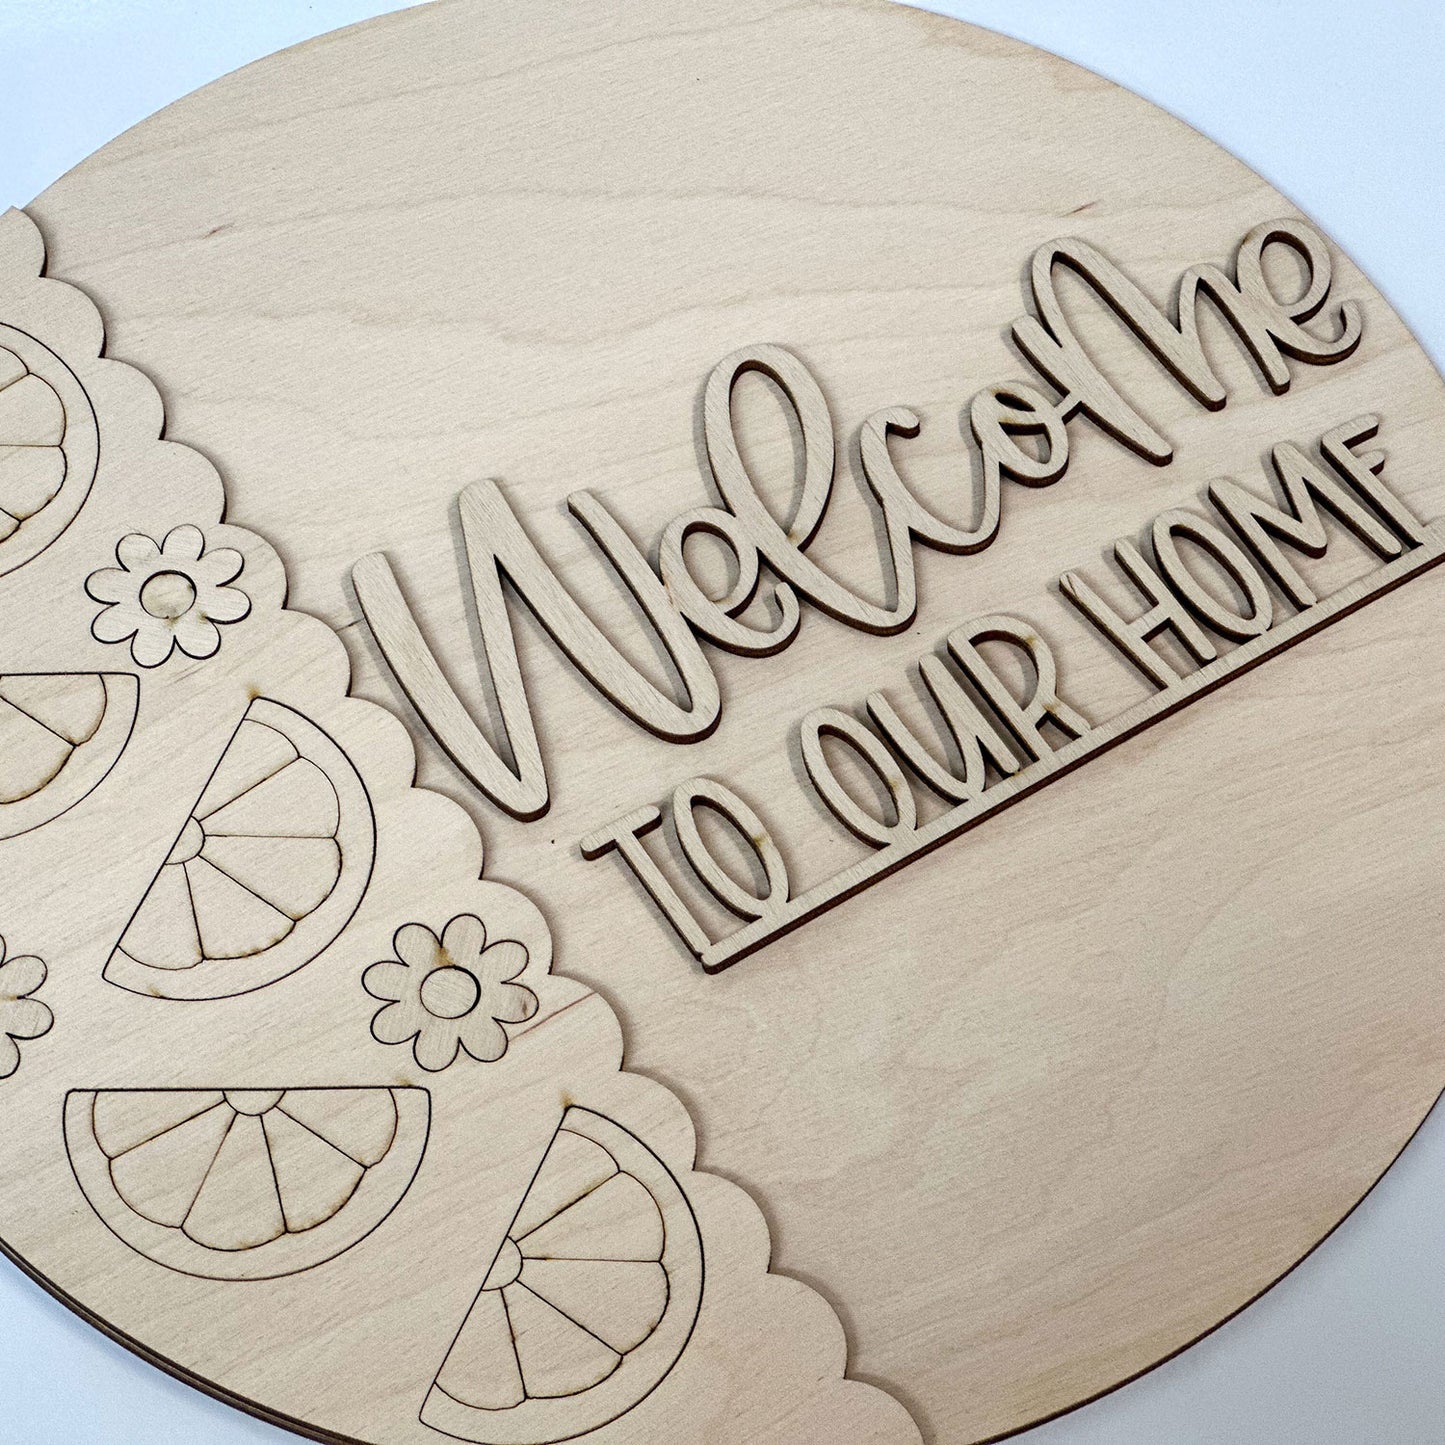 Welcome To Our Home With Citrus Fruit - Welcome Sign Door Hanger